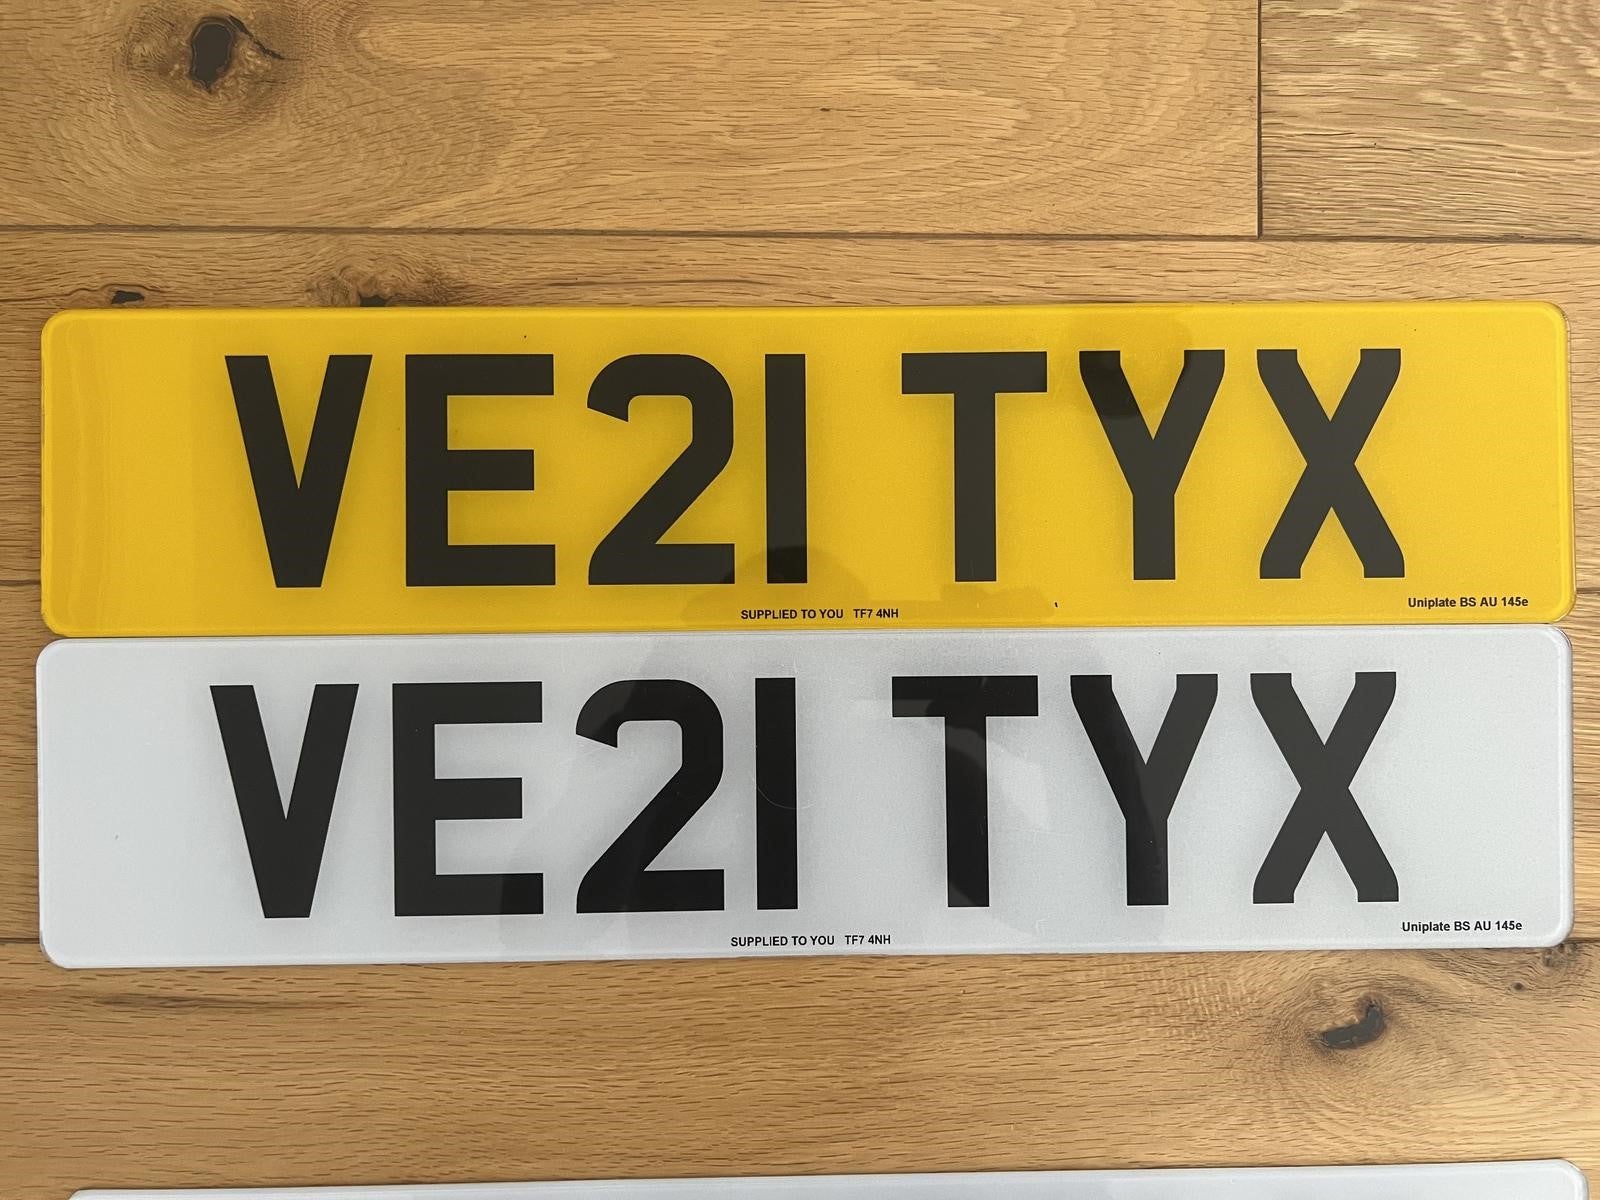 There’s also a thriving trade in vintage personalised plates